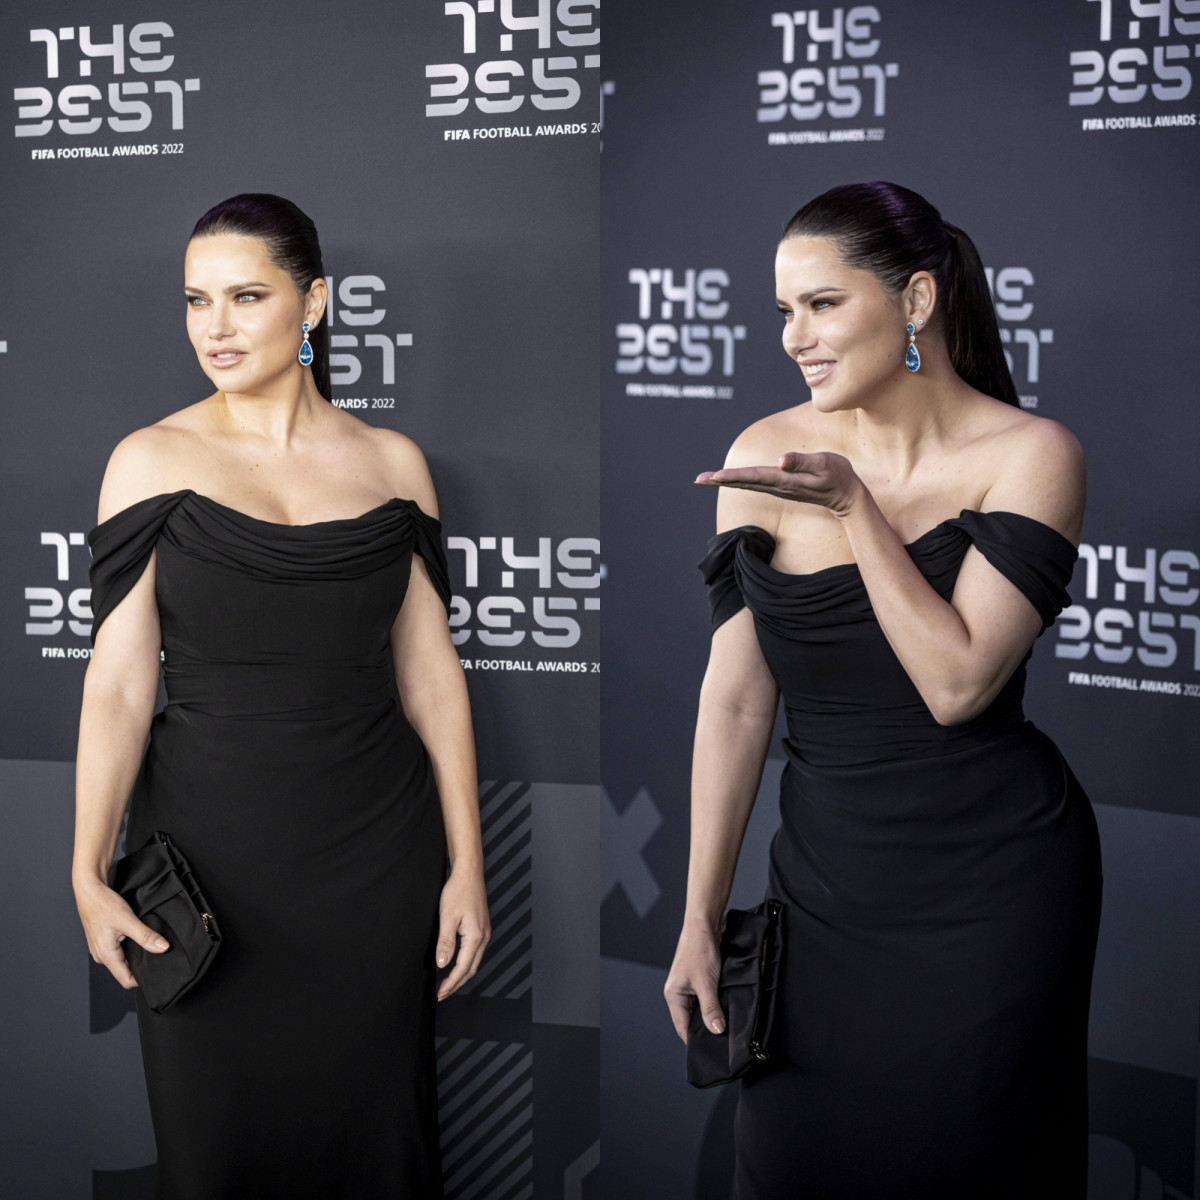 Adriana Lima pictured at The Best FIFA Football Awards 2022 on February 27, 2023 in Paris